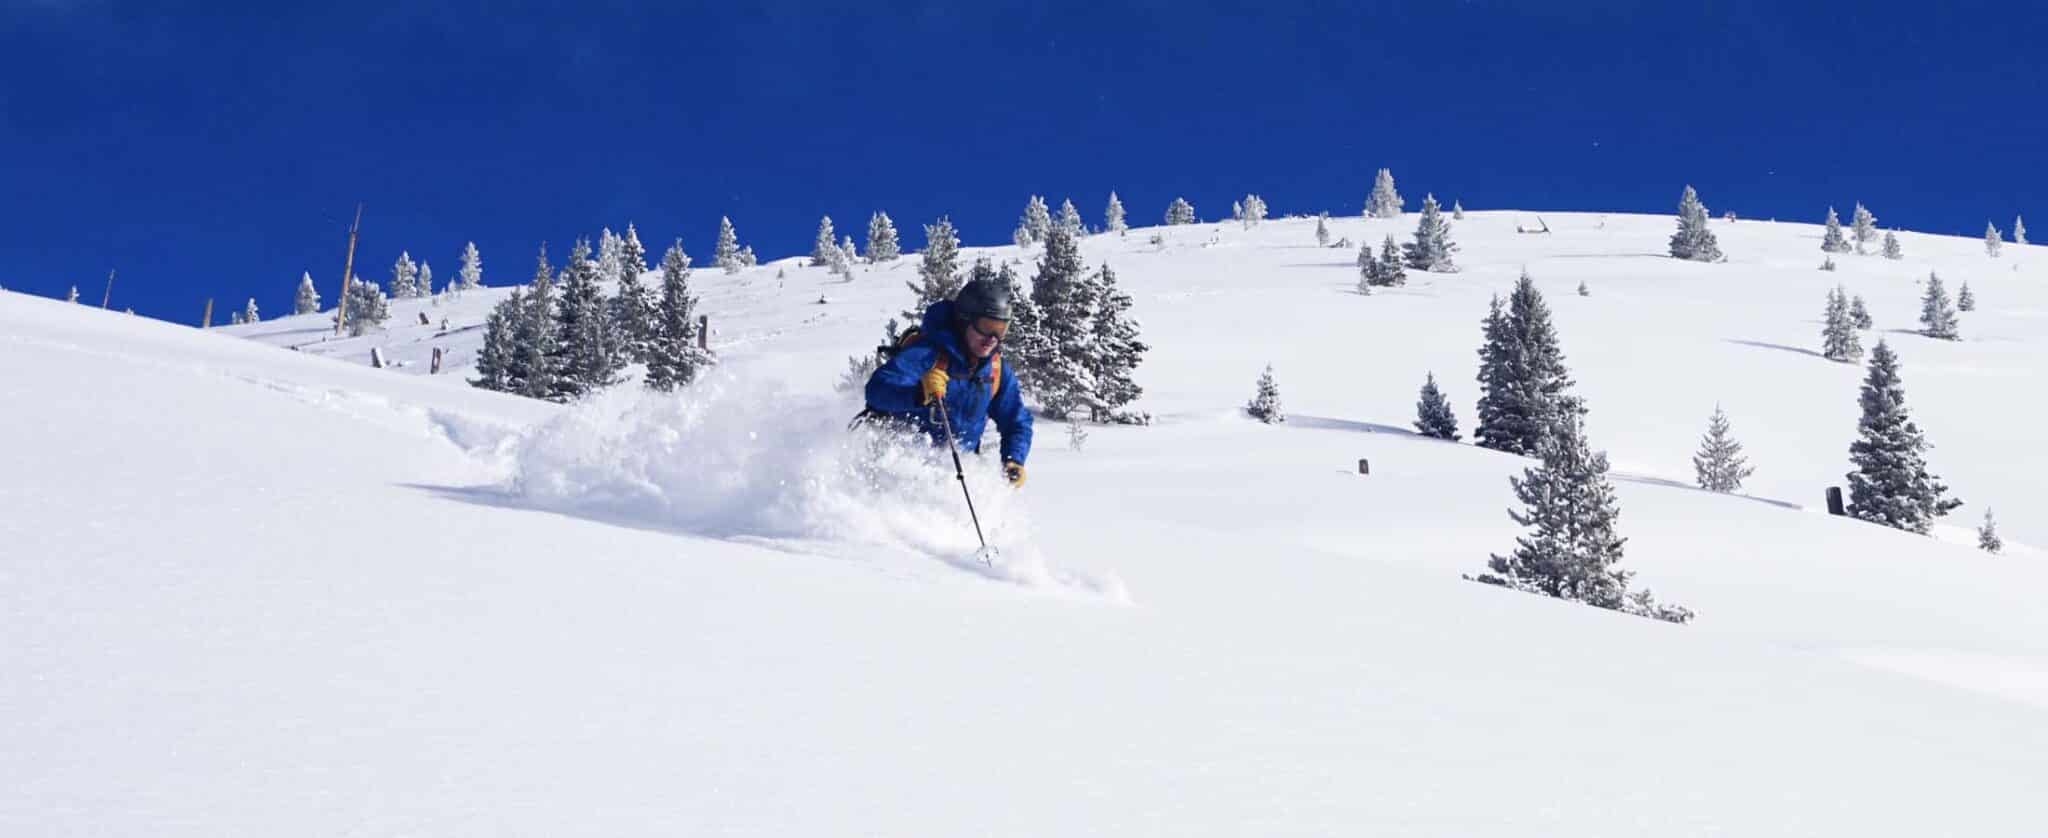 A person skiing down a snowy slope with trees in the background.